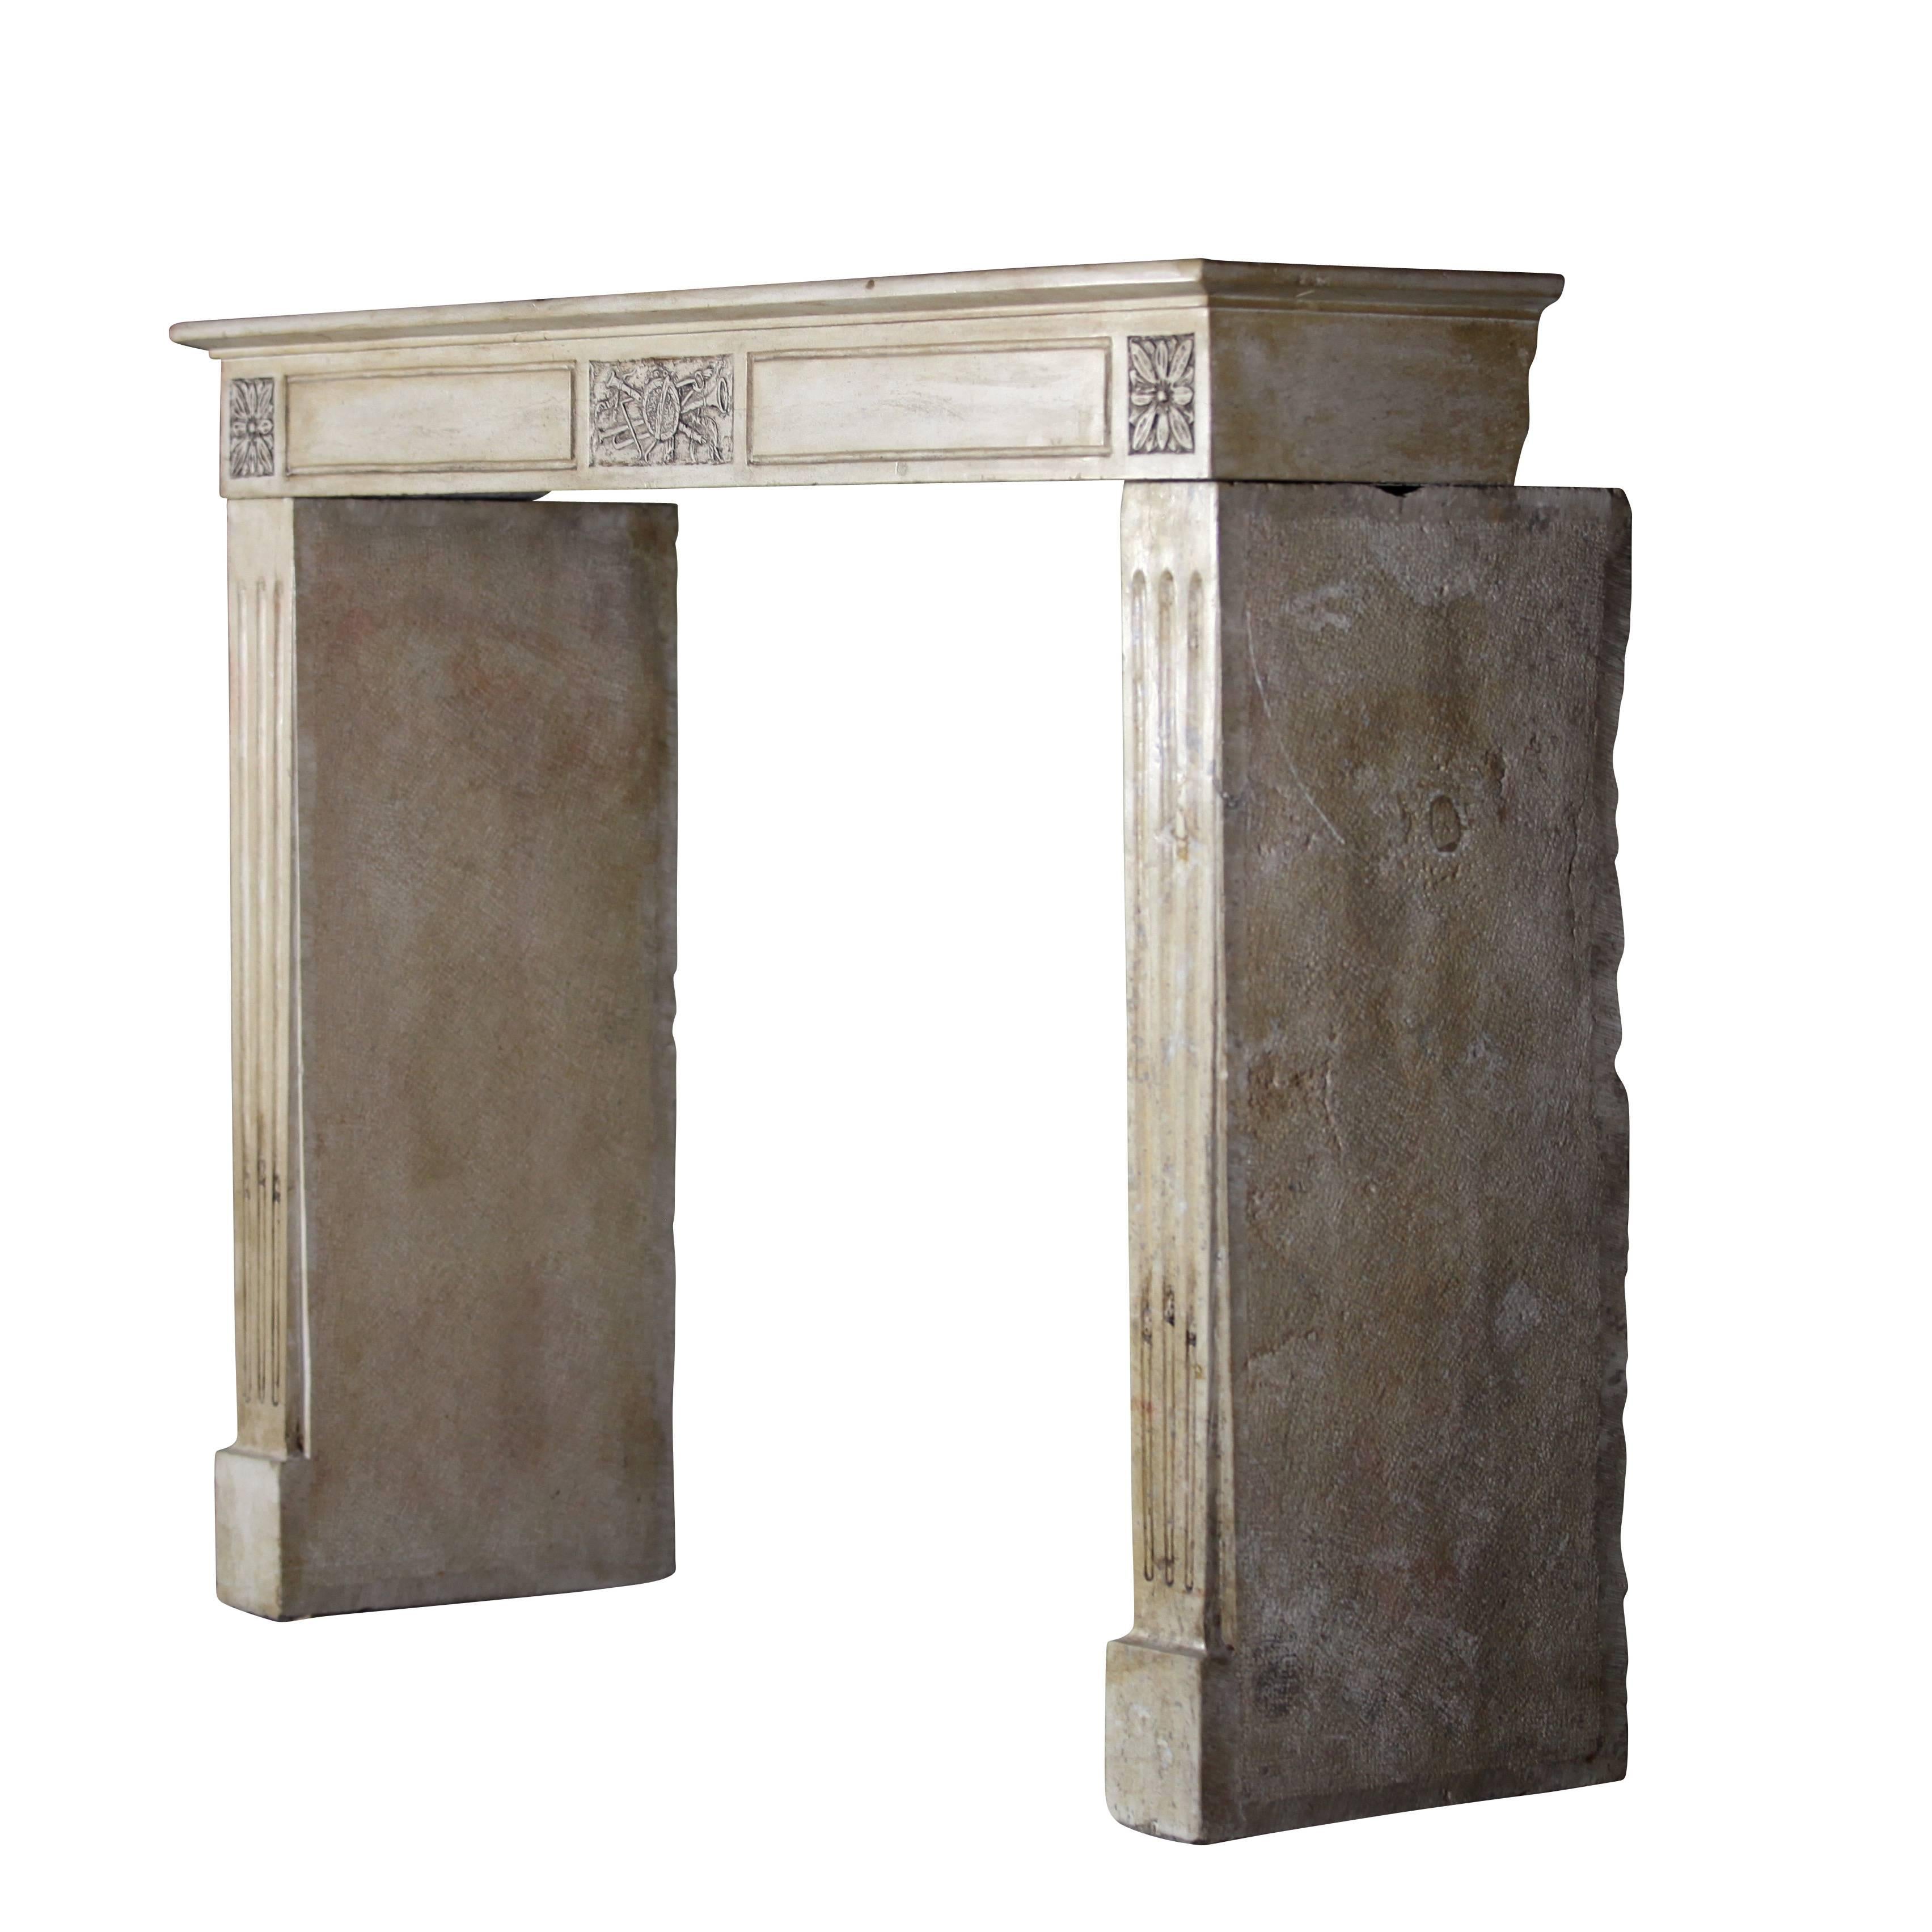 French Directoire Style Period Fireplace Mantel In Stone. For Sale 1